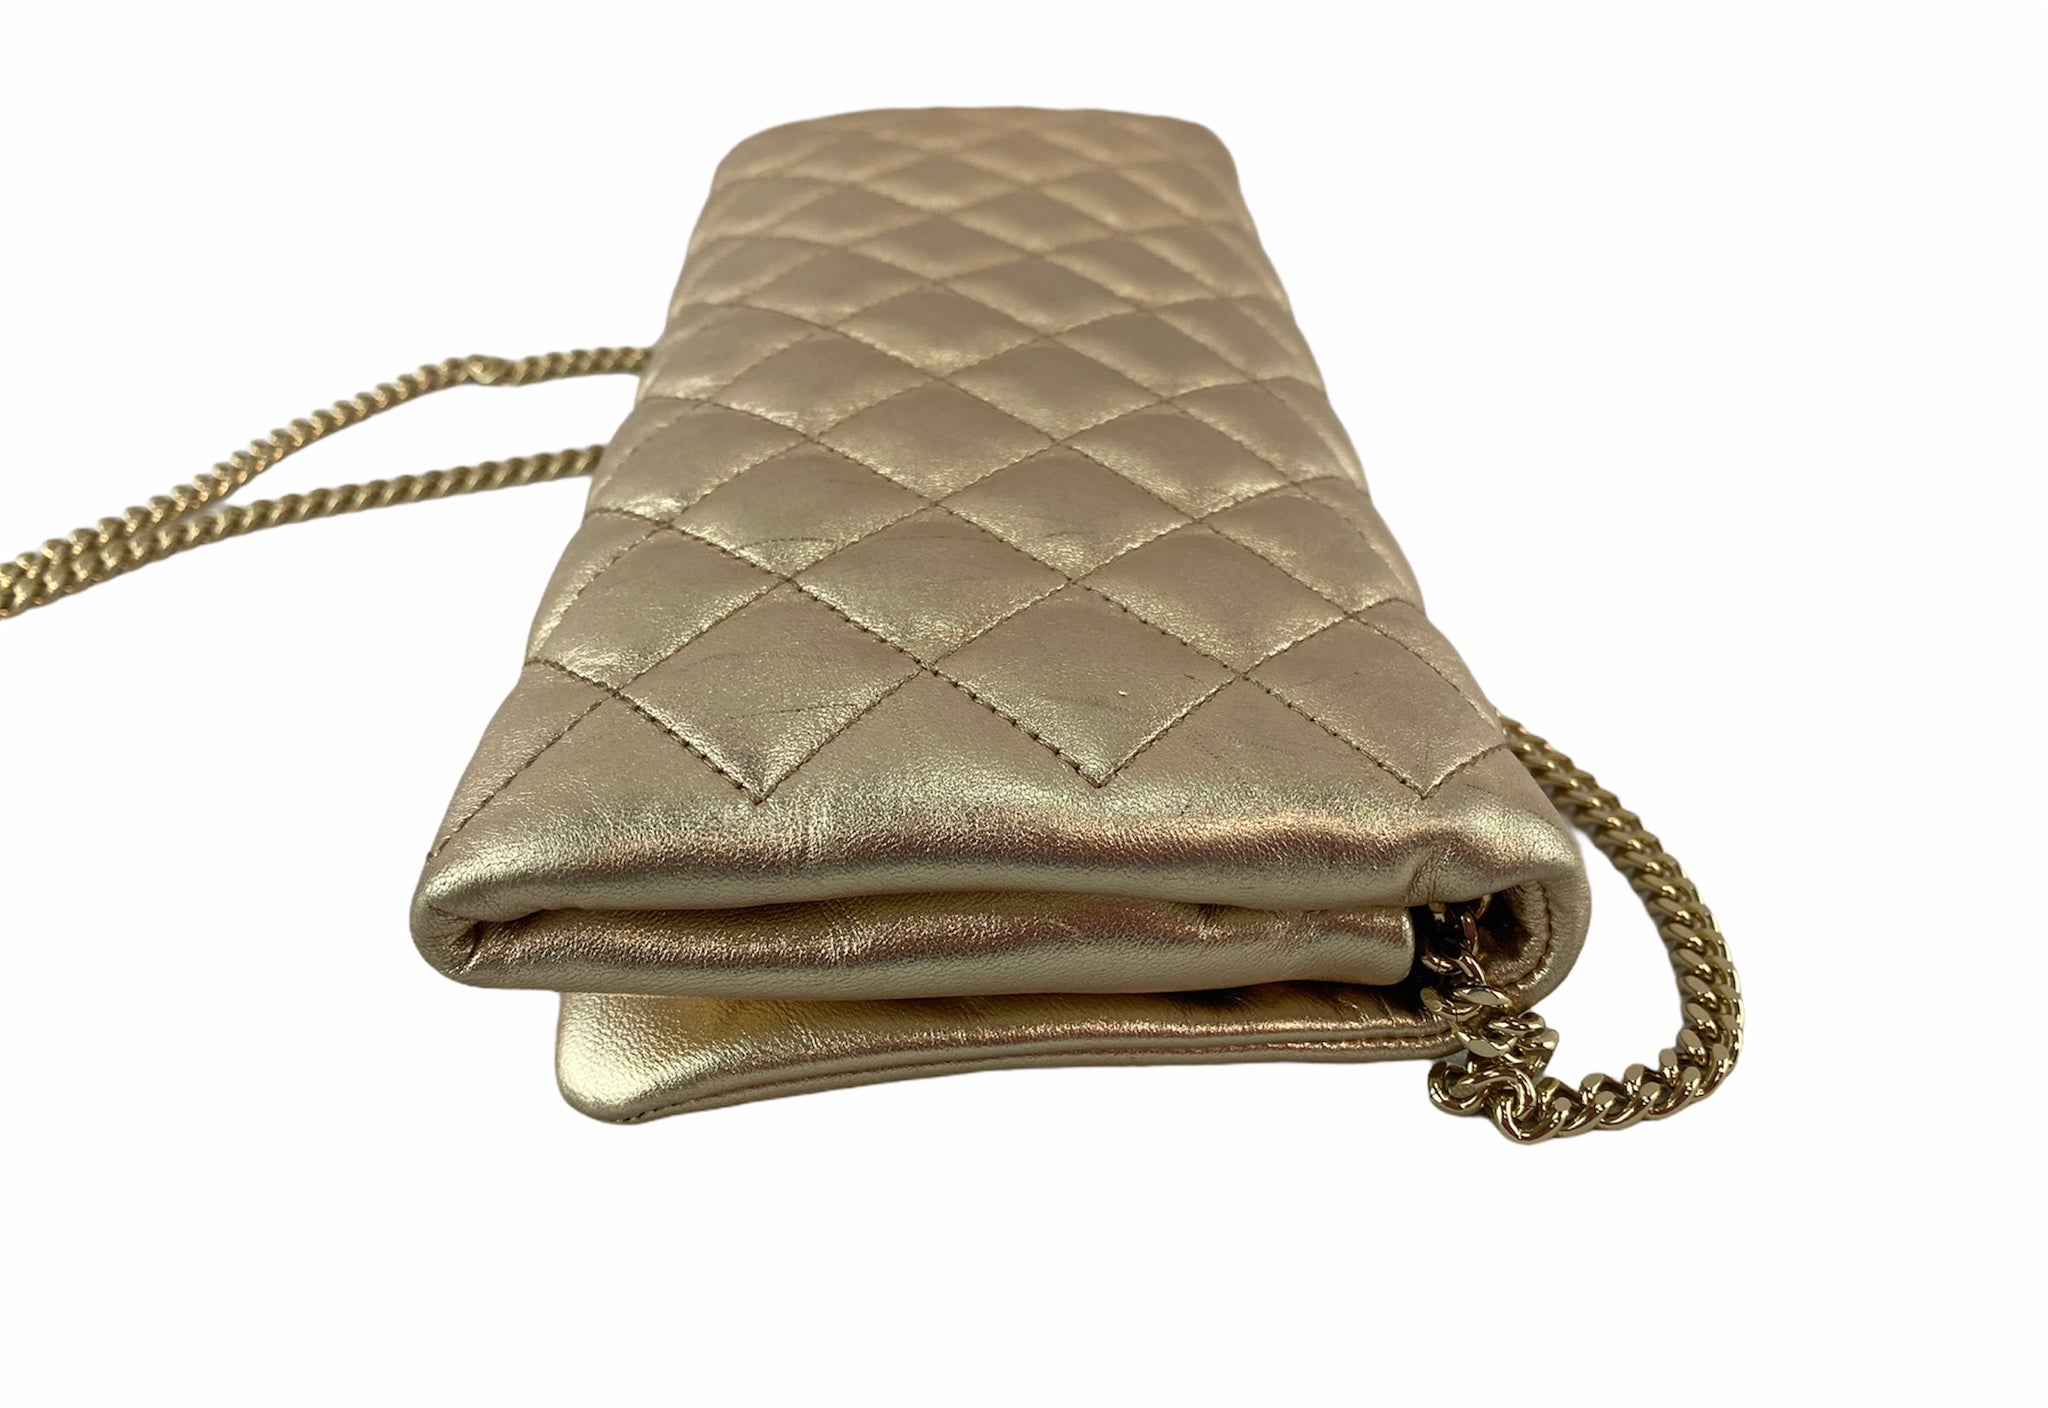 Chanel Pale Blue Quilted Caviar Woc Wallet on Chain